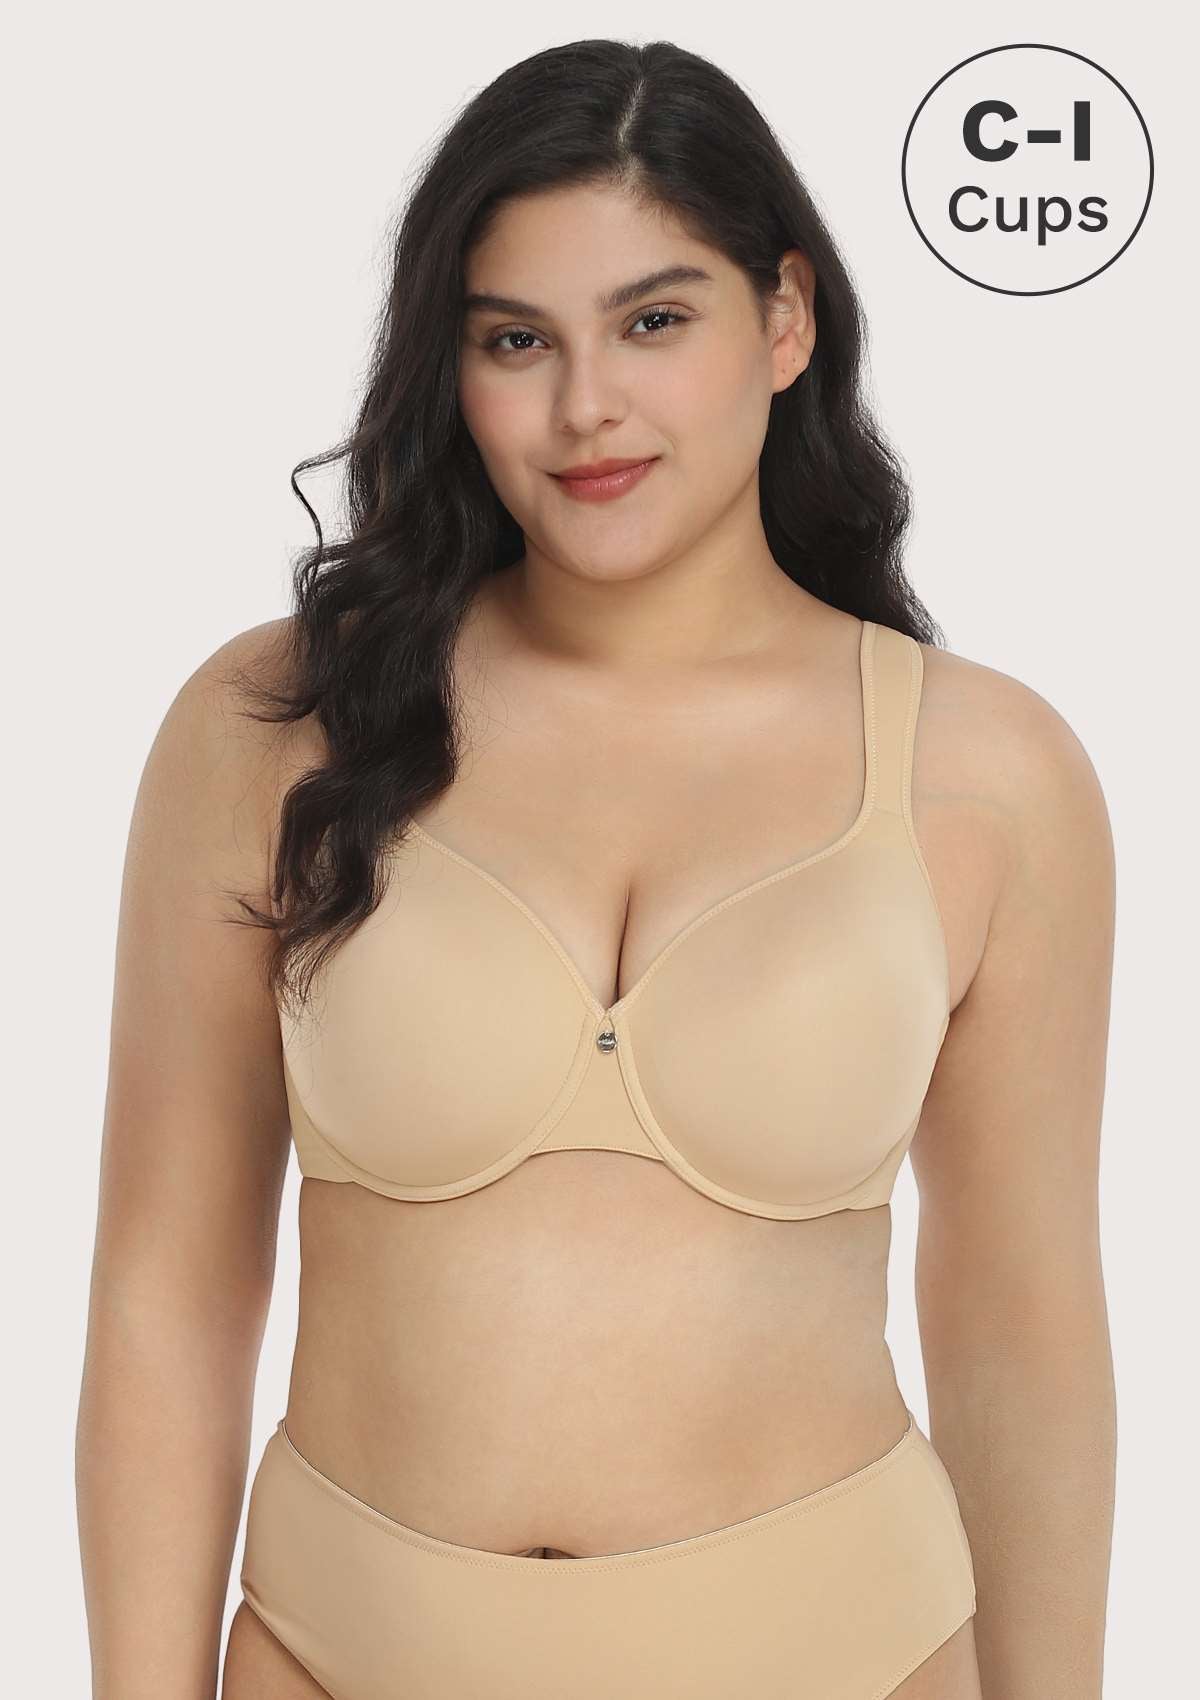 HSIA Patricia Seamless Lightly Padded Minimizer Bra -for Bigger Busts - Beige / 36 / C